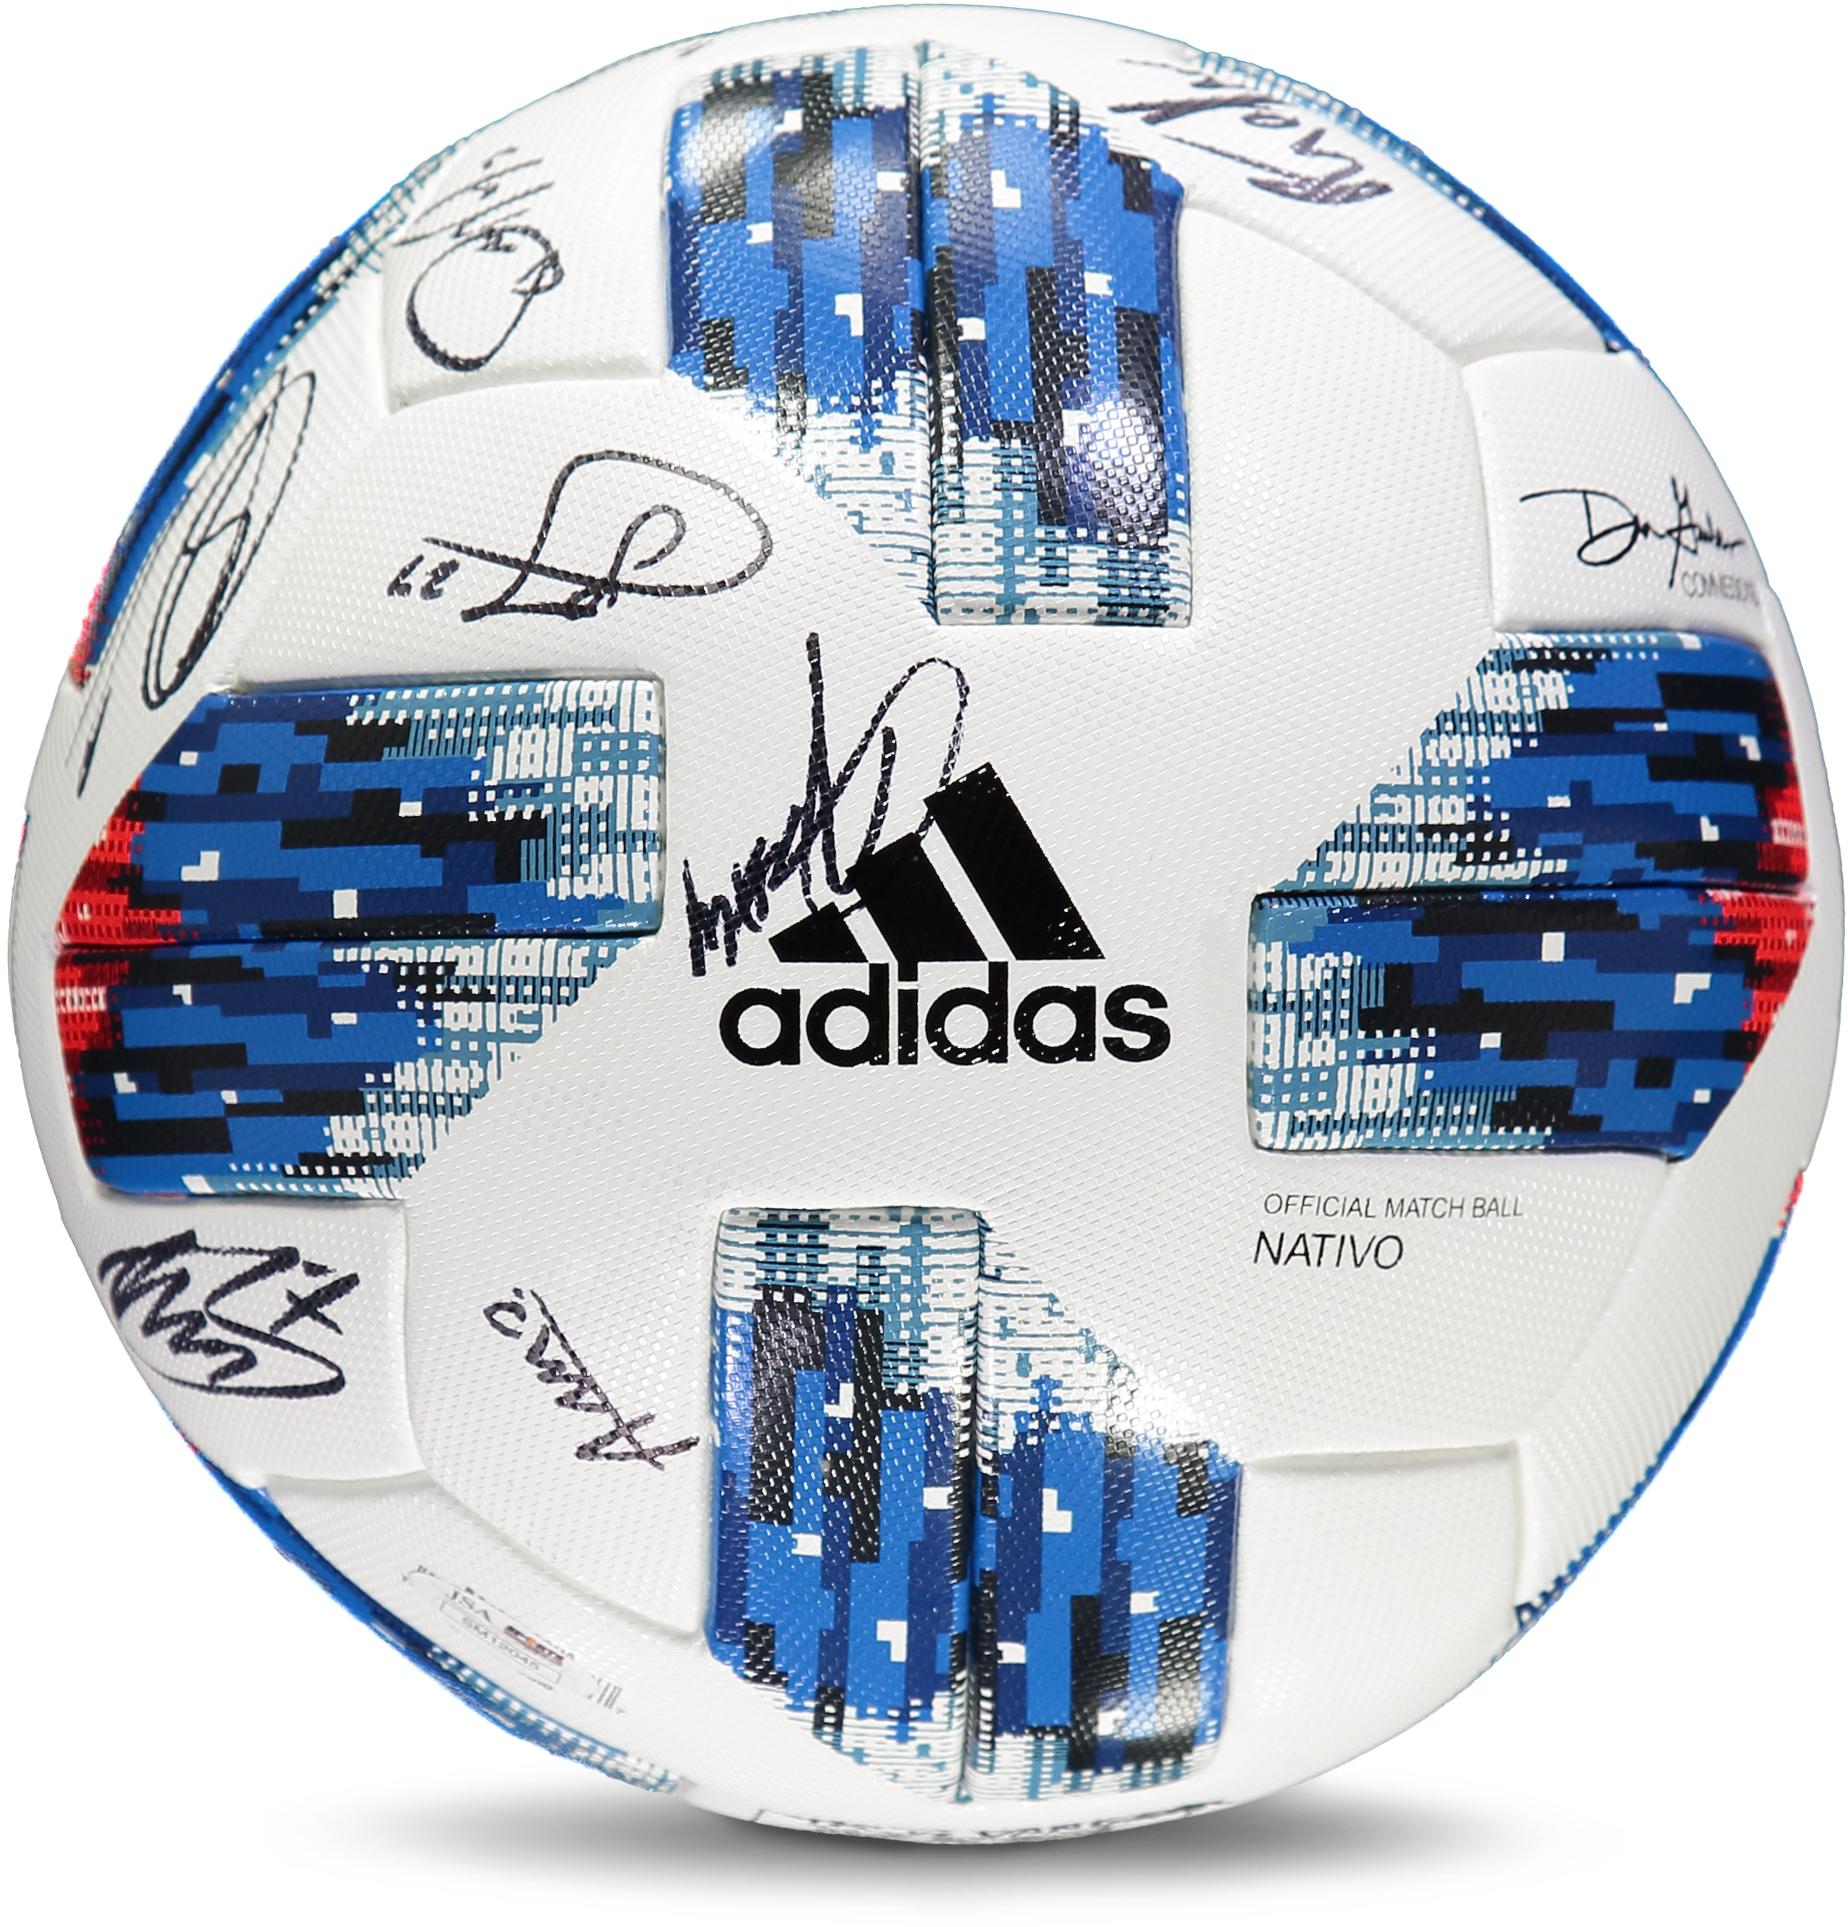 Toronto FC Autographed Match-Used Soccer Ball vs. Vancouver Whitecaps FC on October 6, 2018 with 16 Signatures - Fanatics Authentic Certified